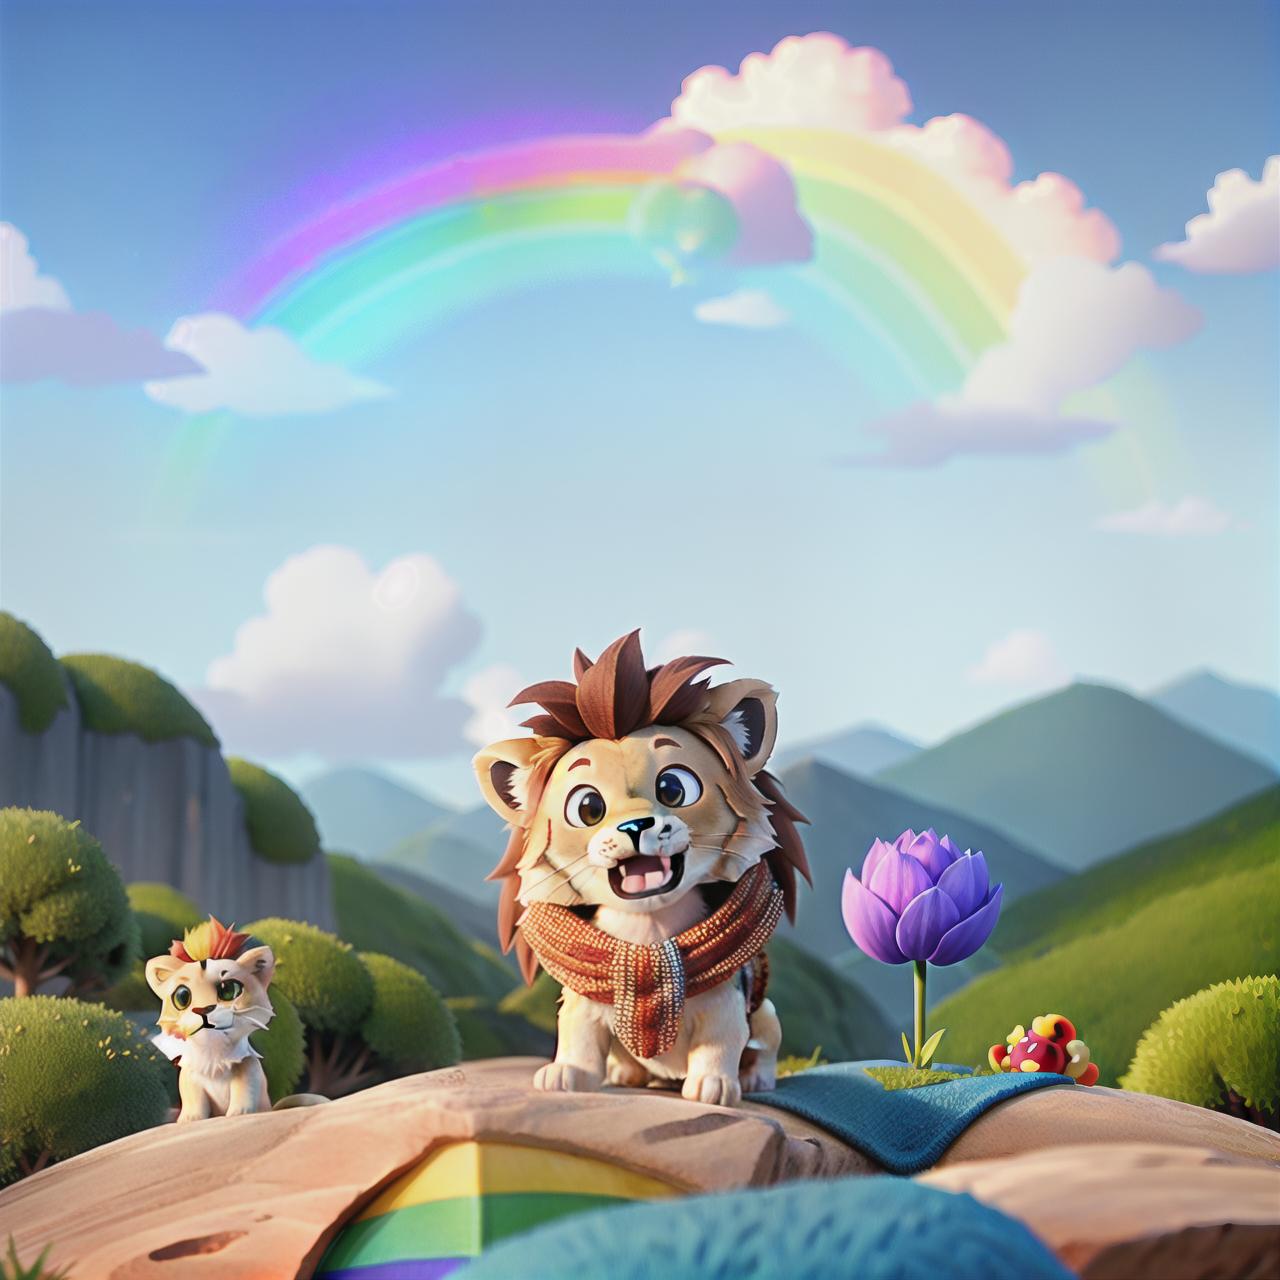  Masterpiece, best quality, little lion, smile, big eyes, valley, rainbow in the sky, musical notes